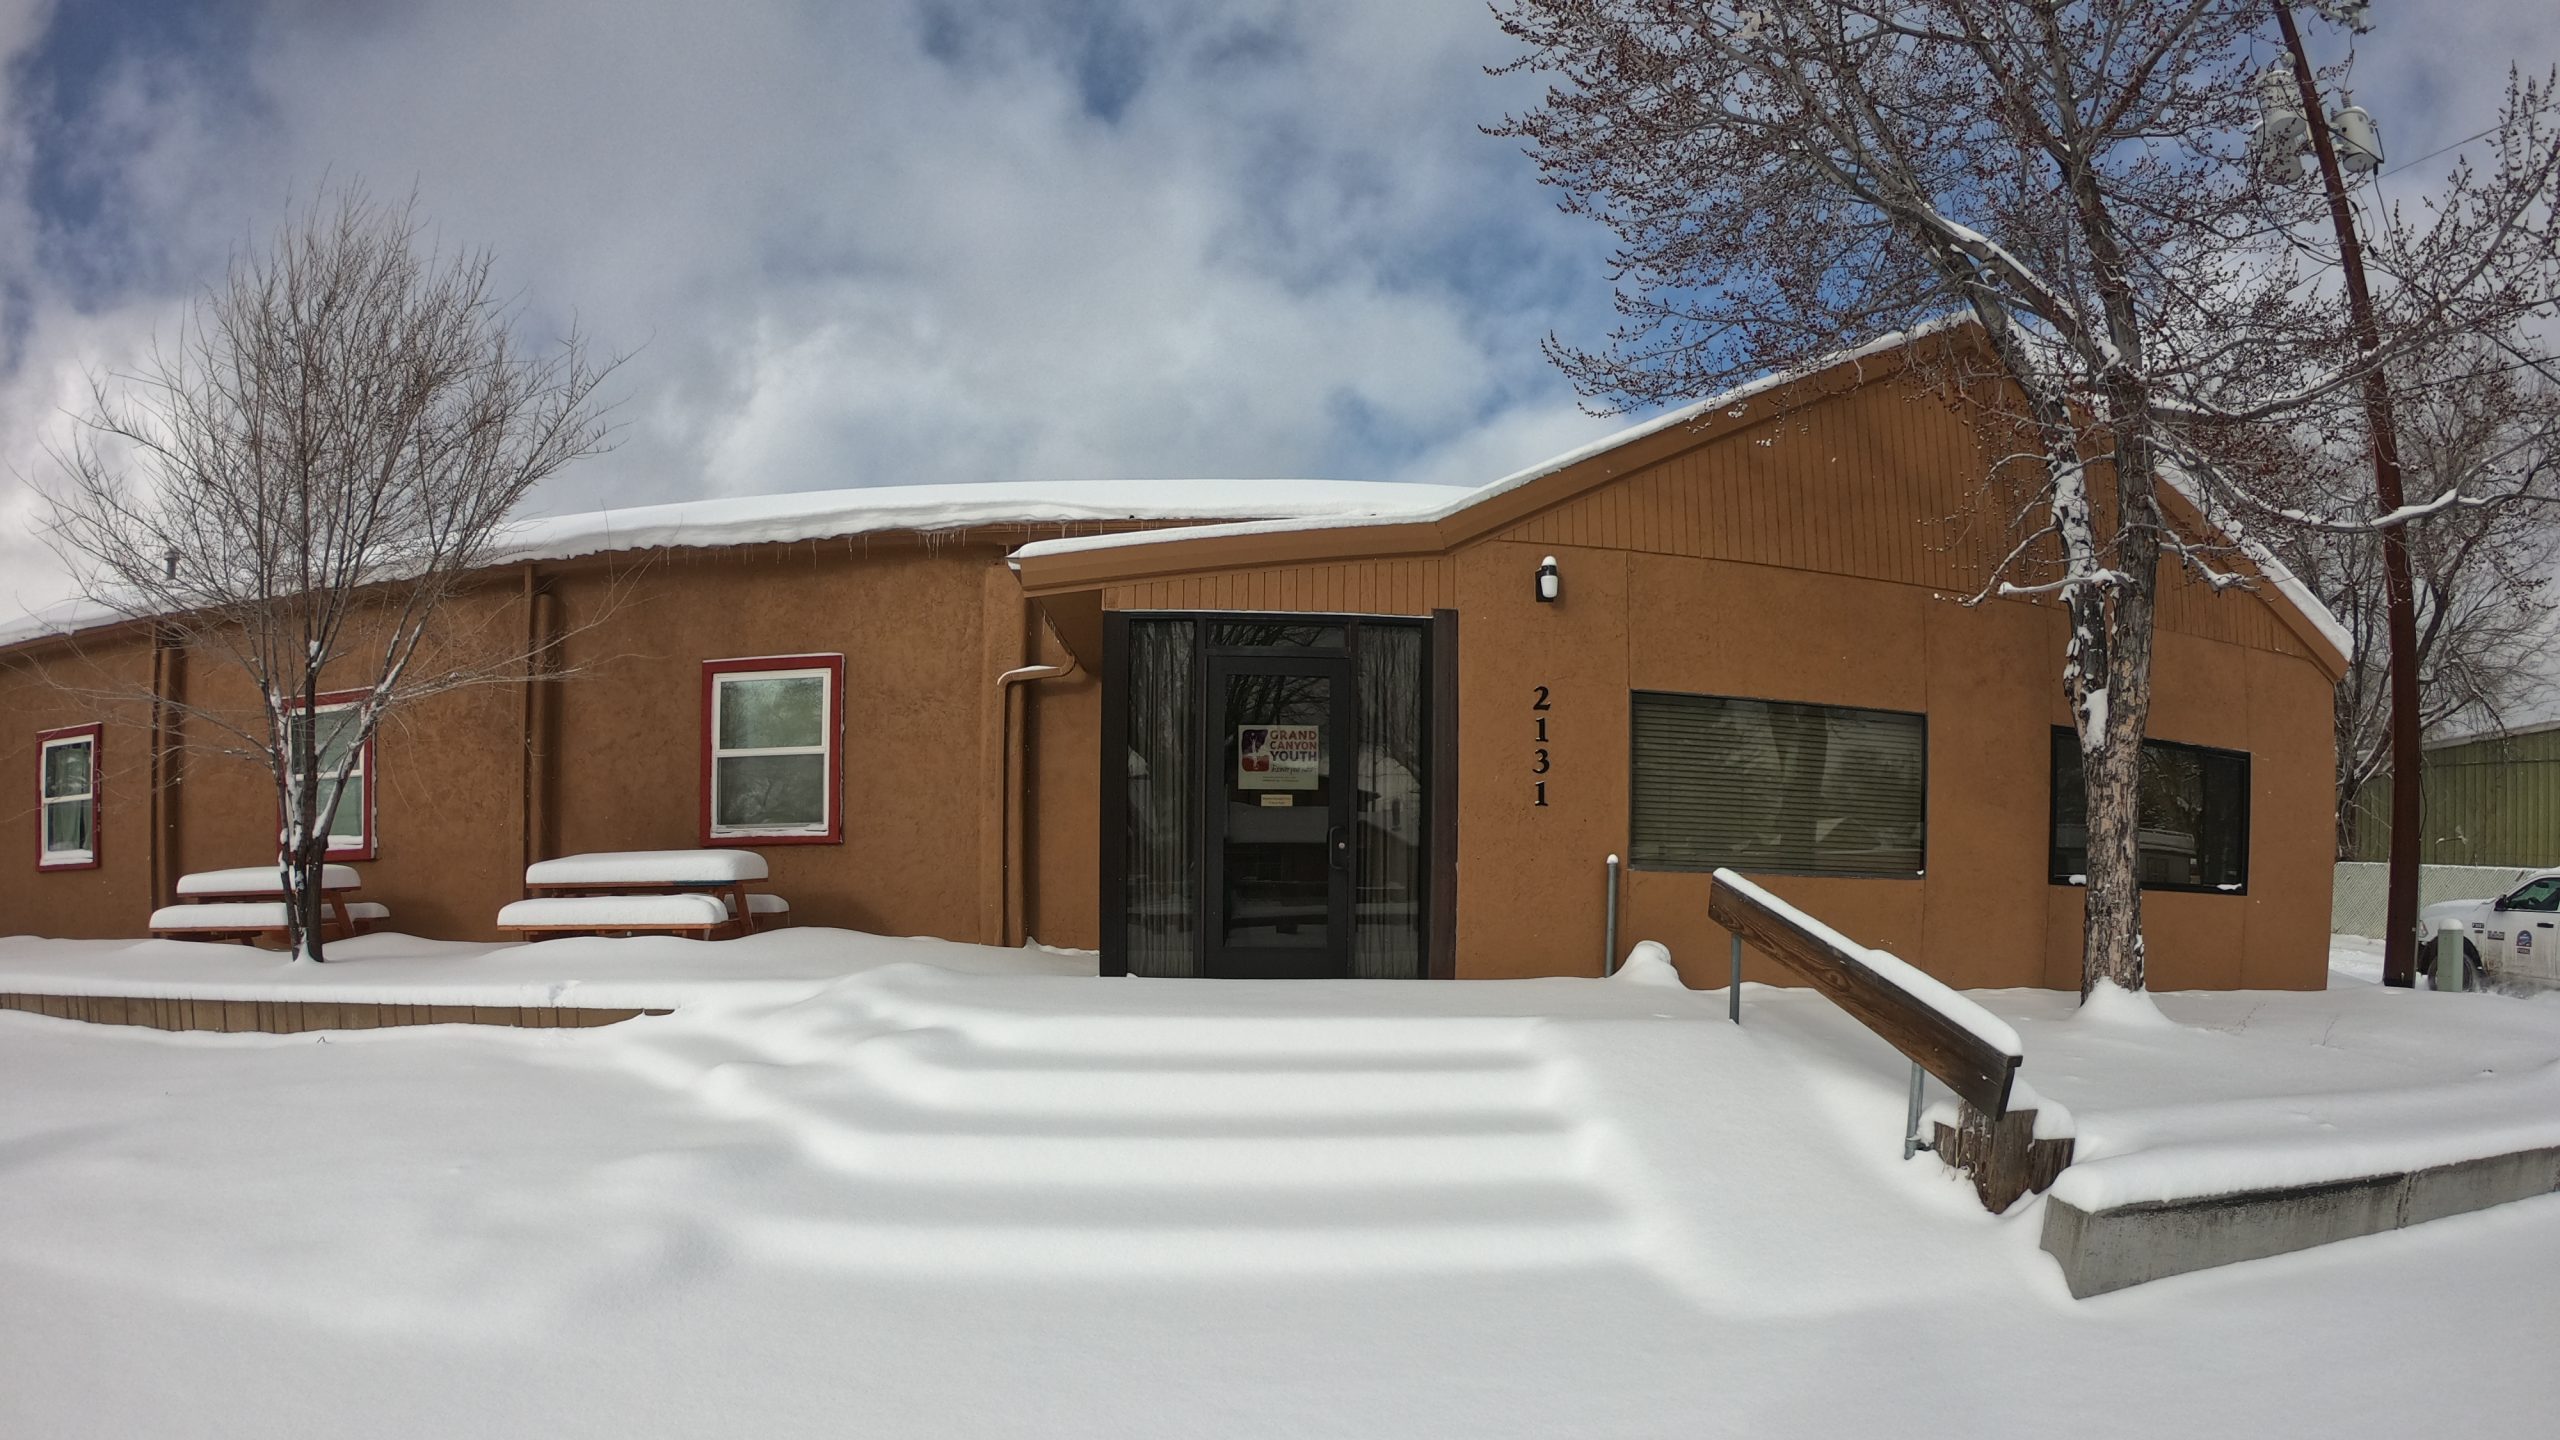 Grand Canyon Youth Building covered in snow